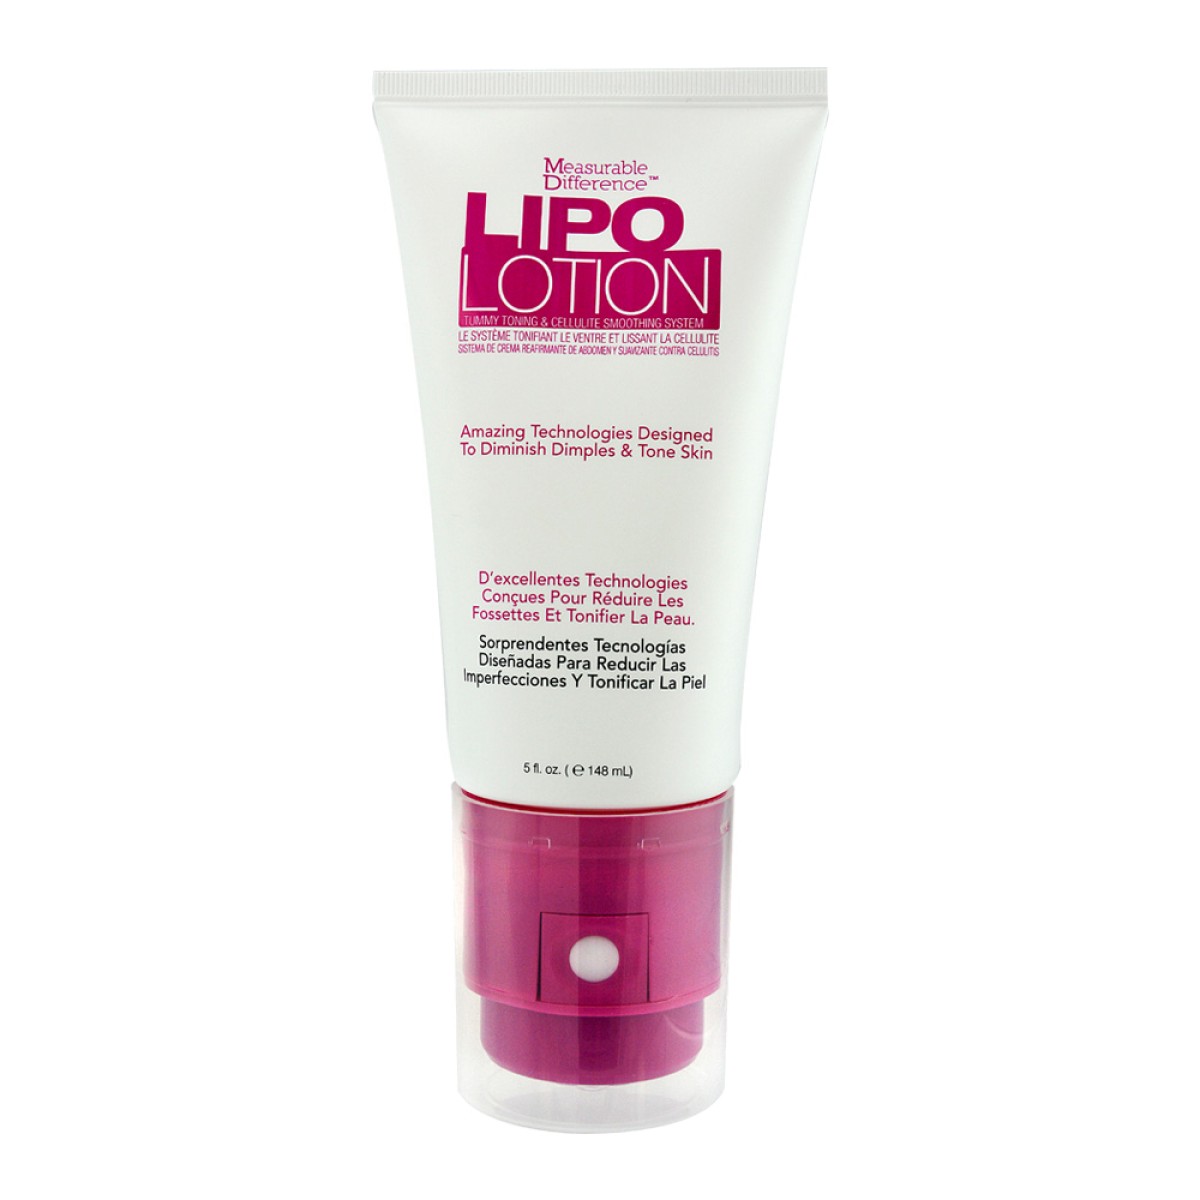 Measurable Difference Lipo Lotion